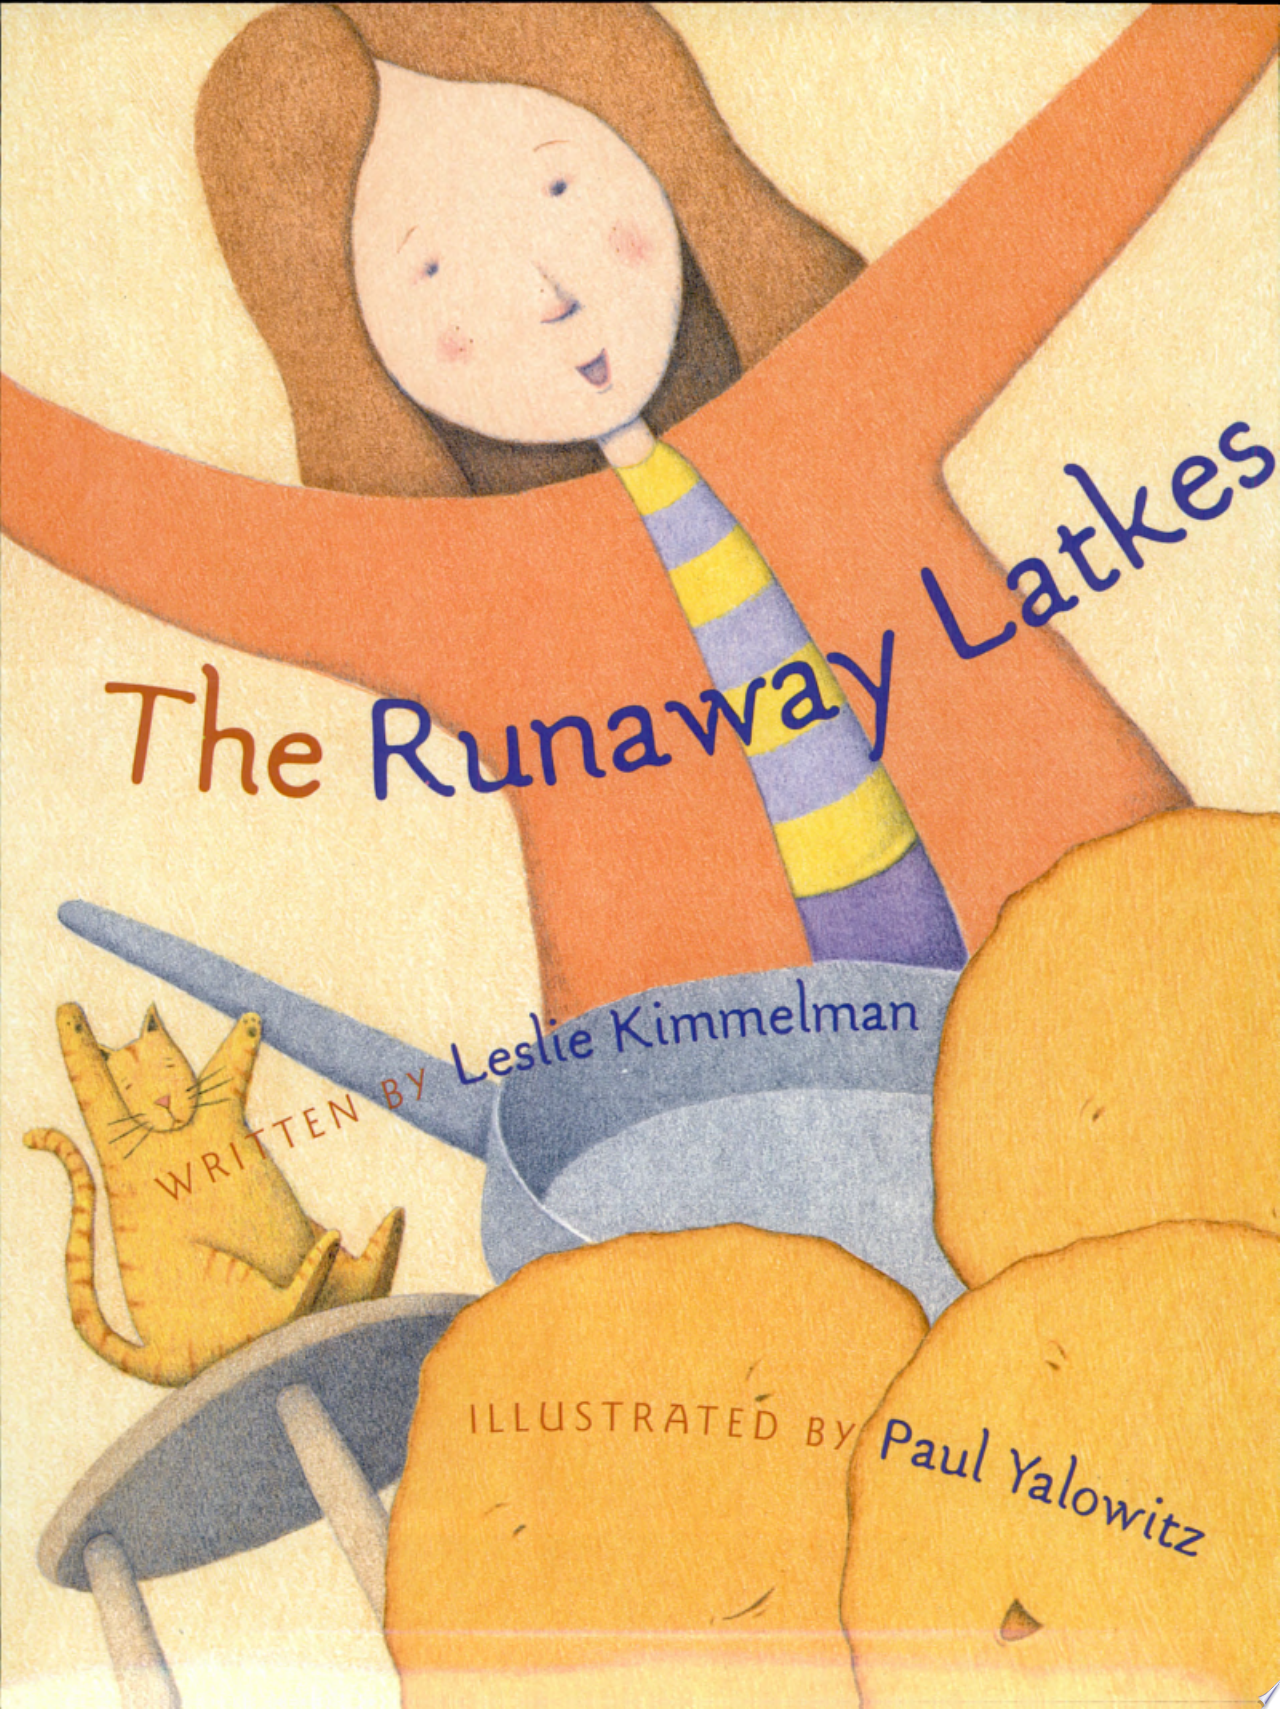 Image for "The Runaway Latkes"